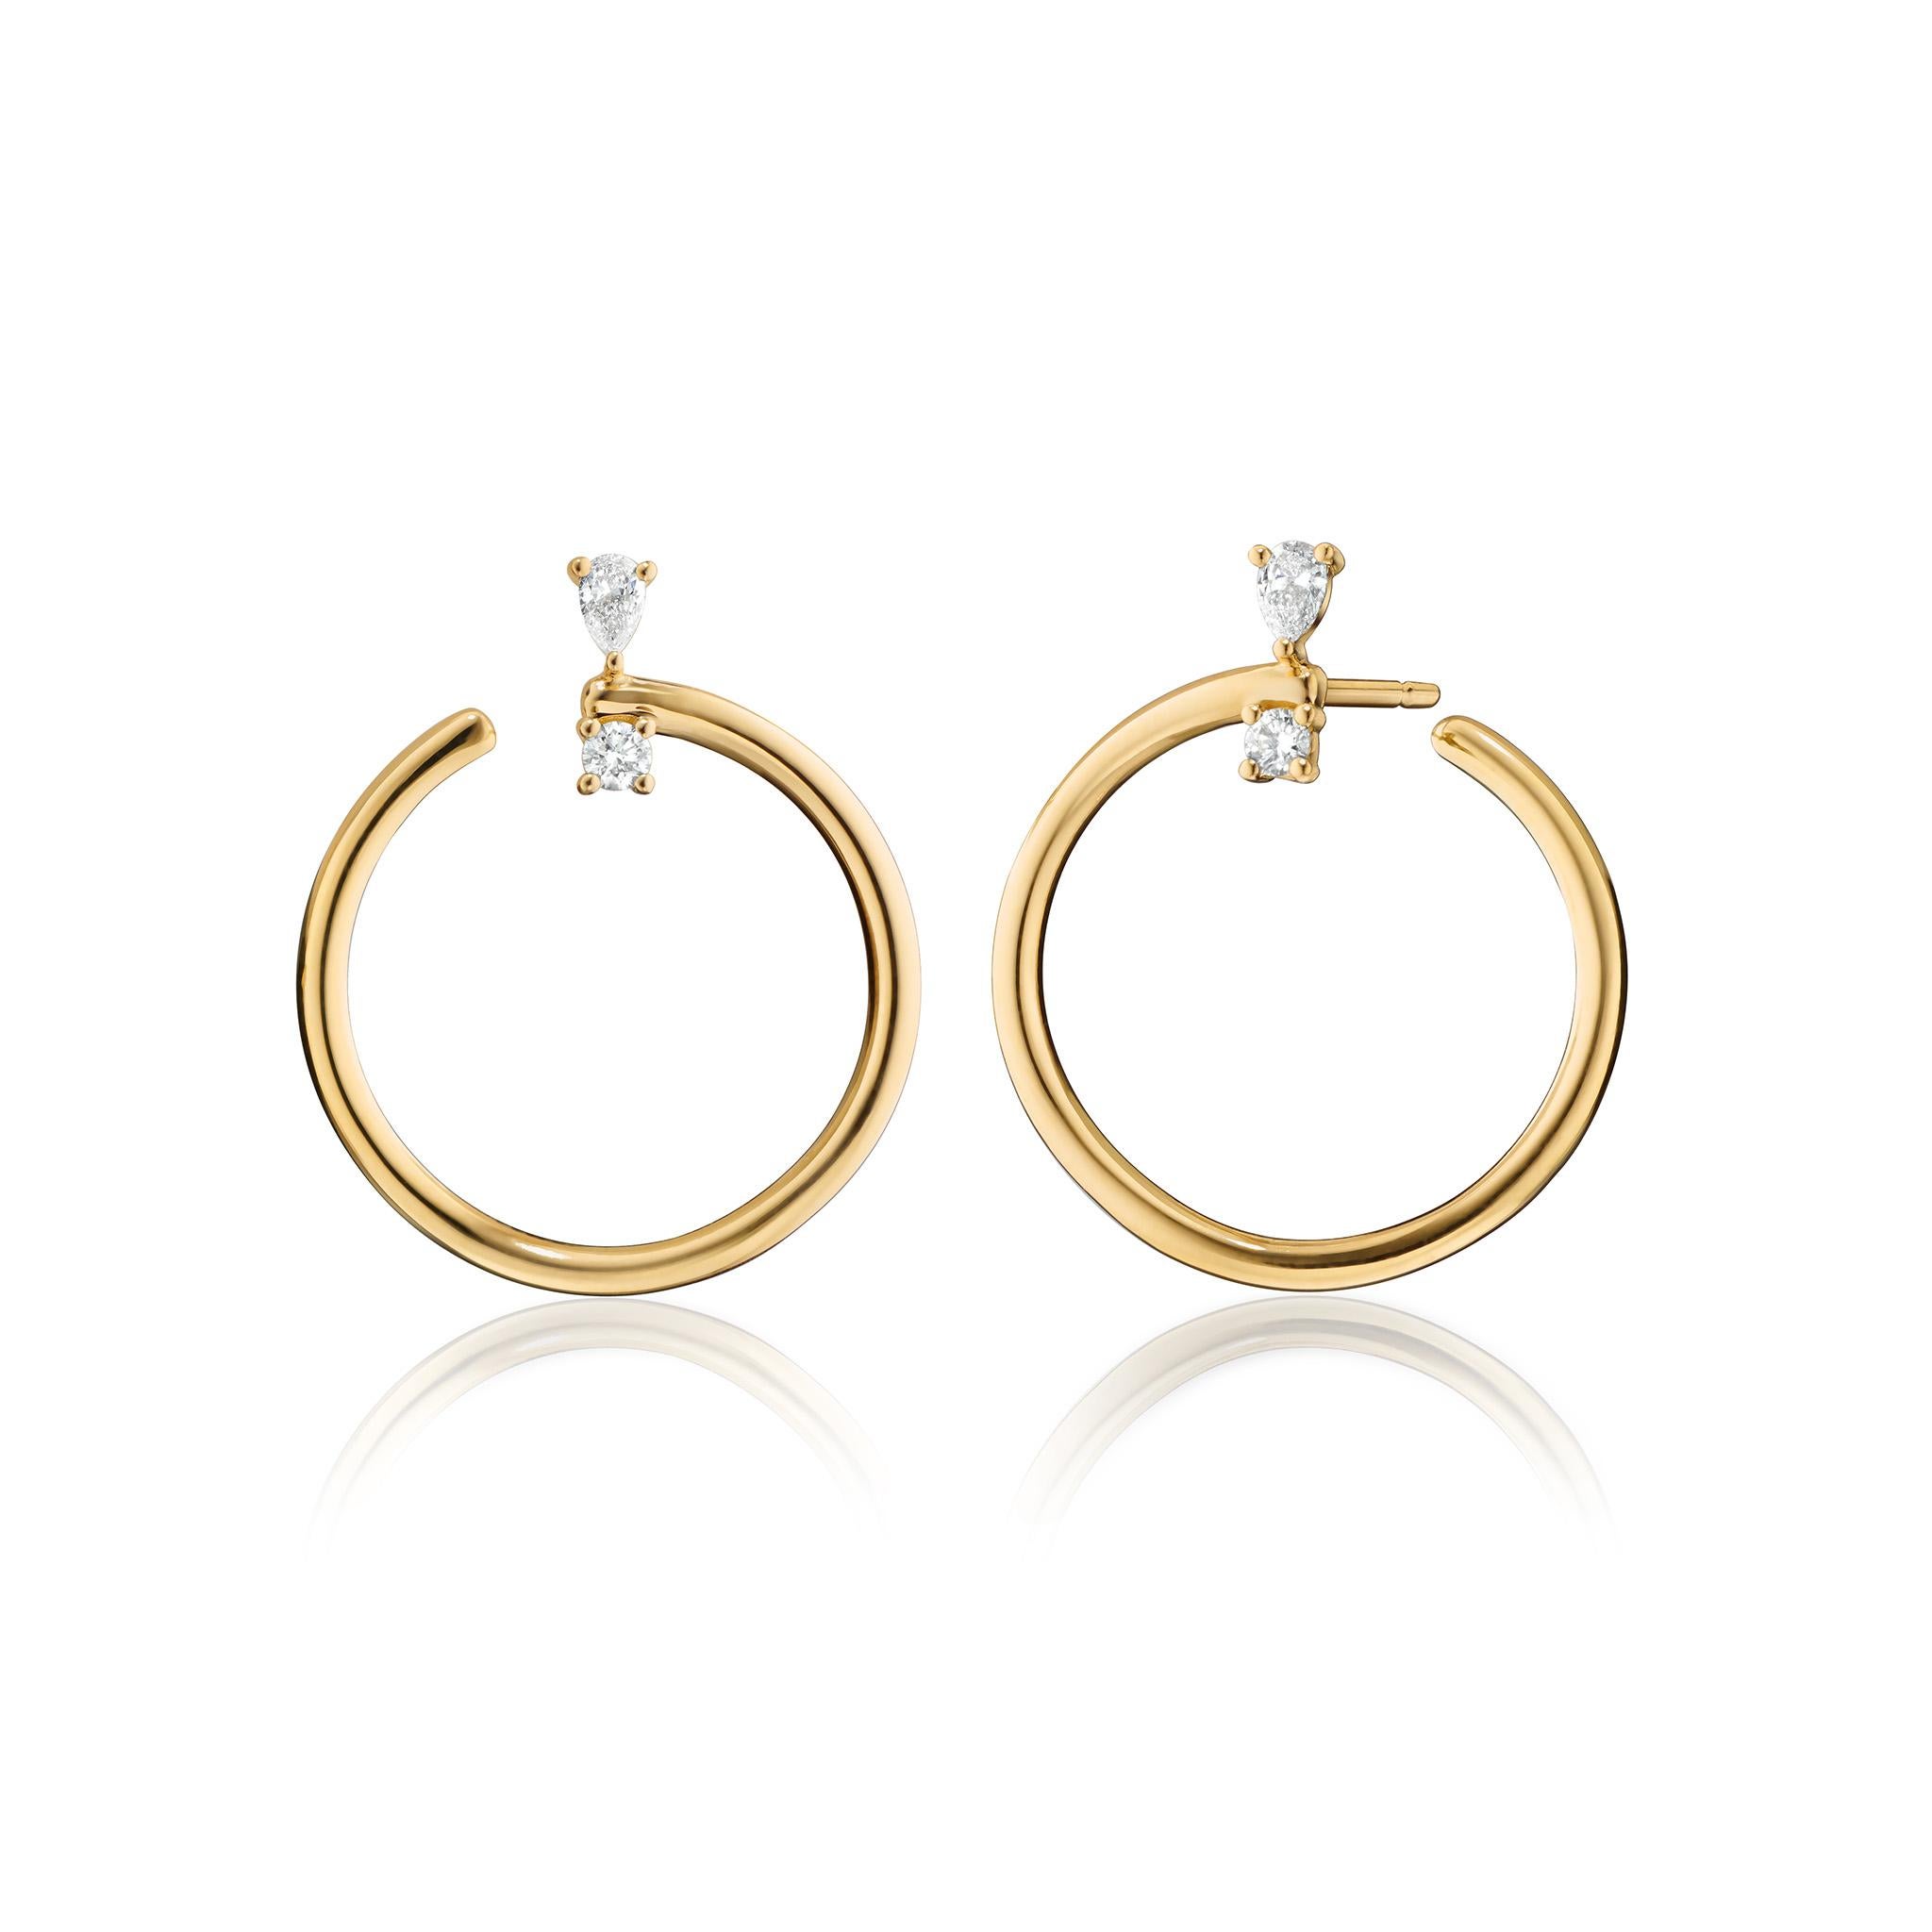 These Monica Rich Kosann galaxy inspired wrap hoop earrings begin on your ear with beautifully cut round and pear shaped diamonds. The 15/16